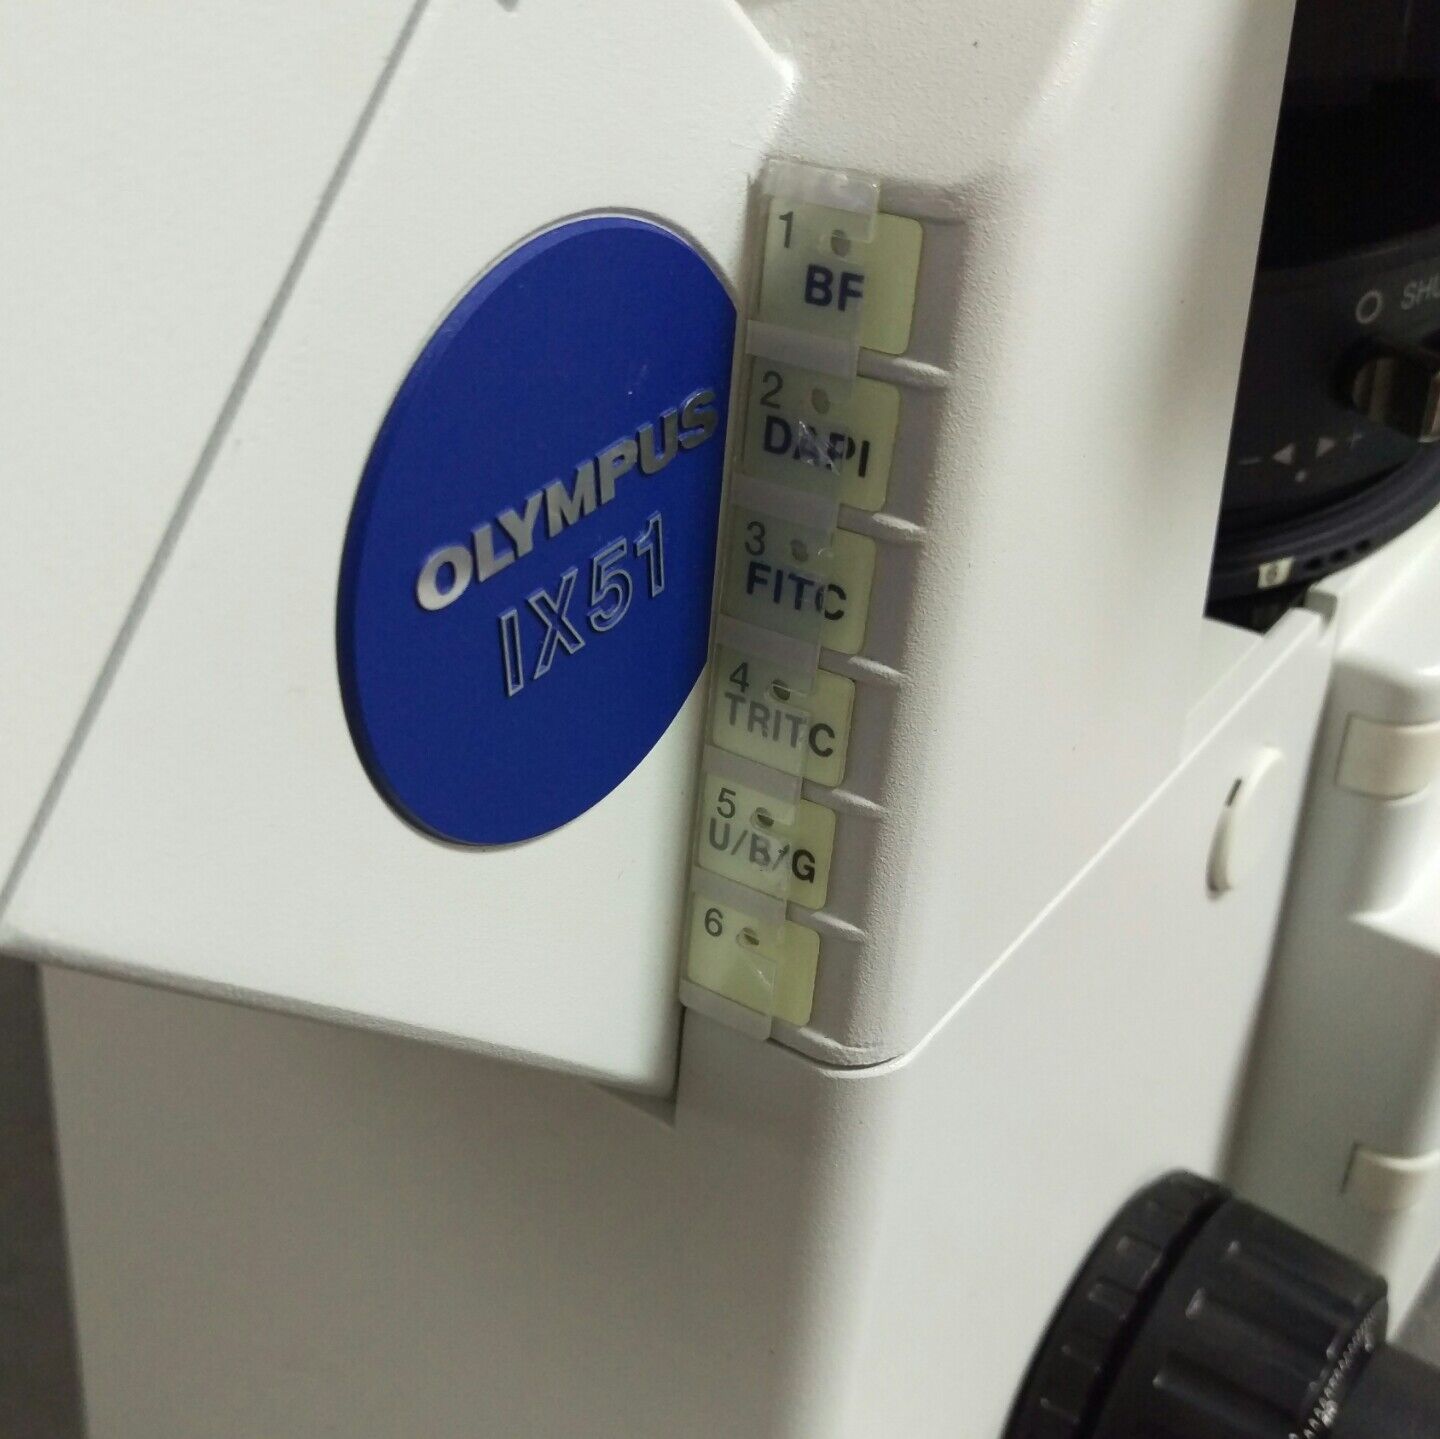 Olympus Microscope IX51 Inverted Fluorescence and Phase Contrast - microscopemarketplace